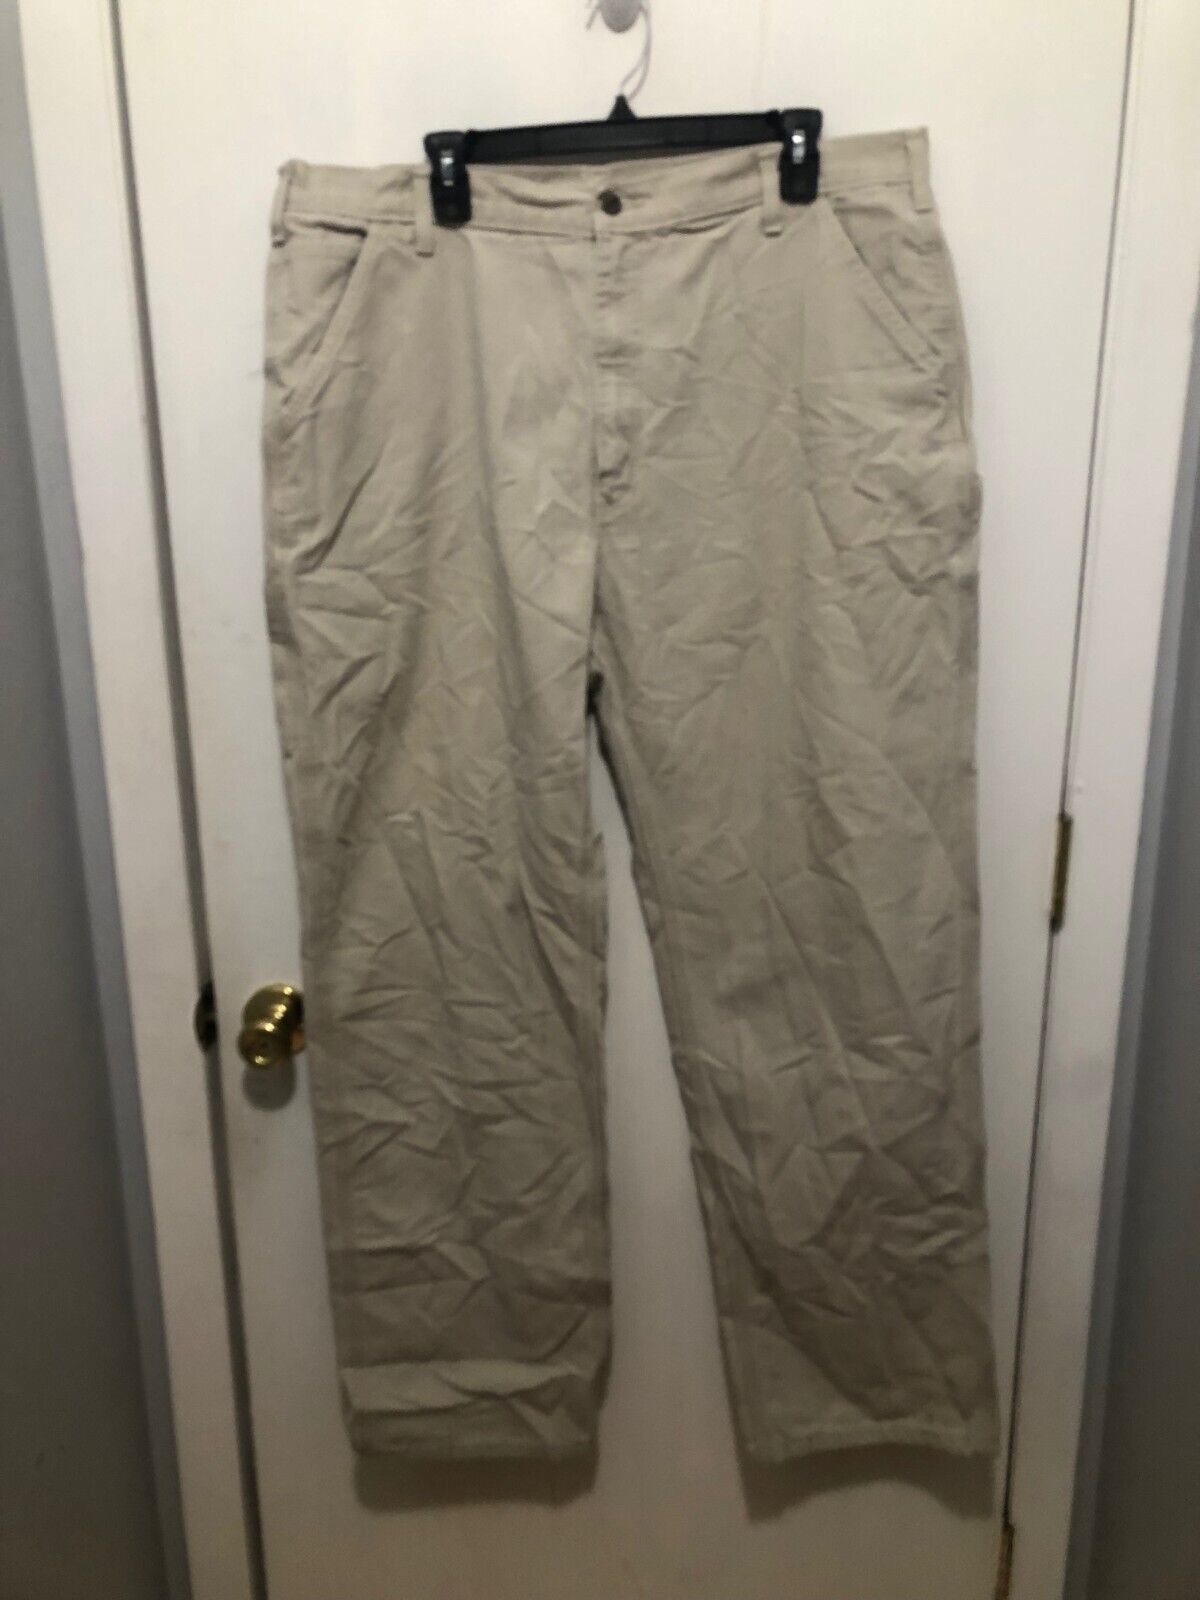 Primary image for Carhartt Mens Carpenter Cargo Heavyduty Pants Tag 40X34 Actual is 38X33 Beige